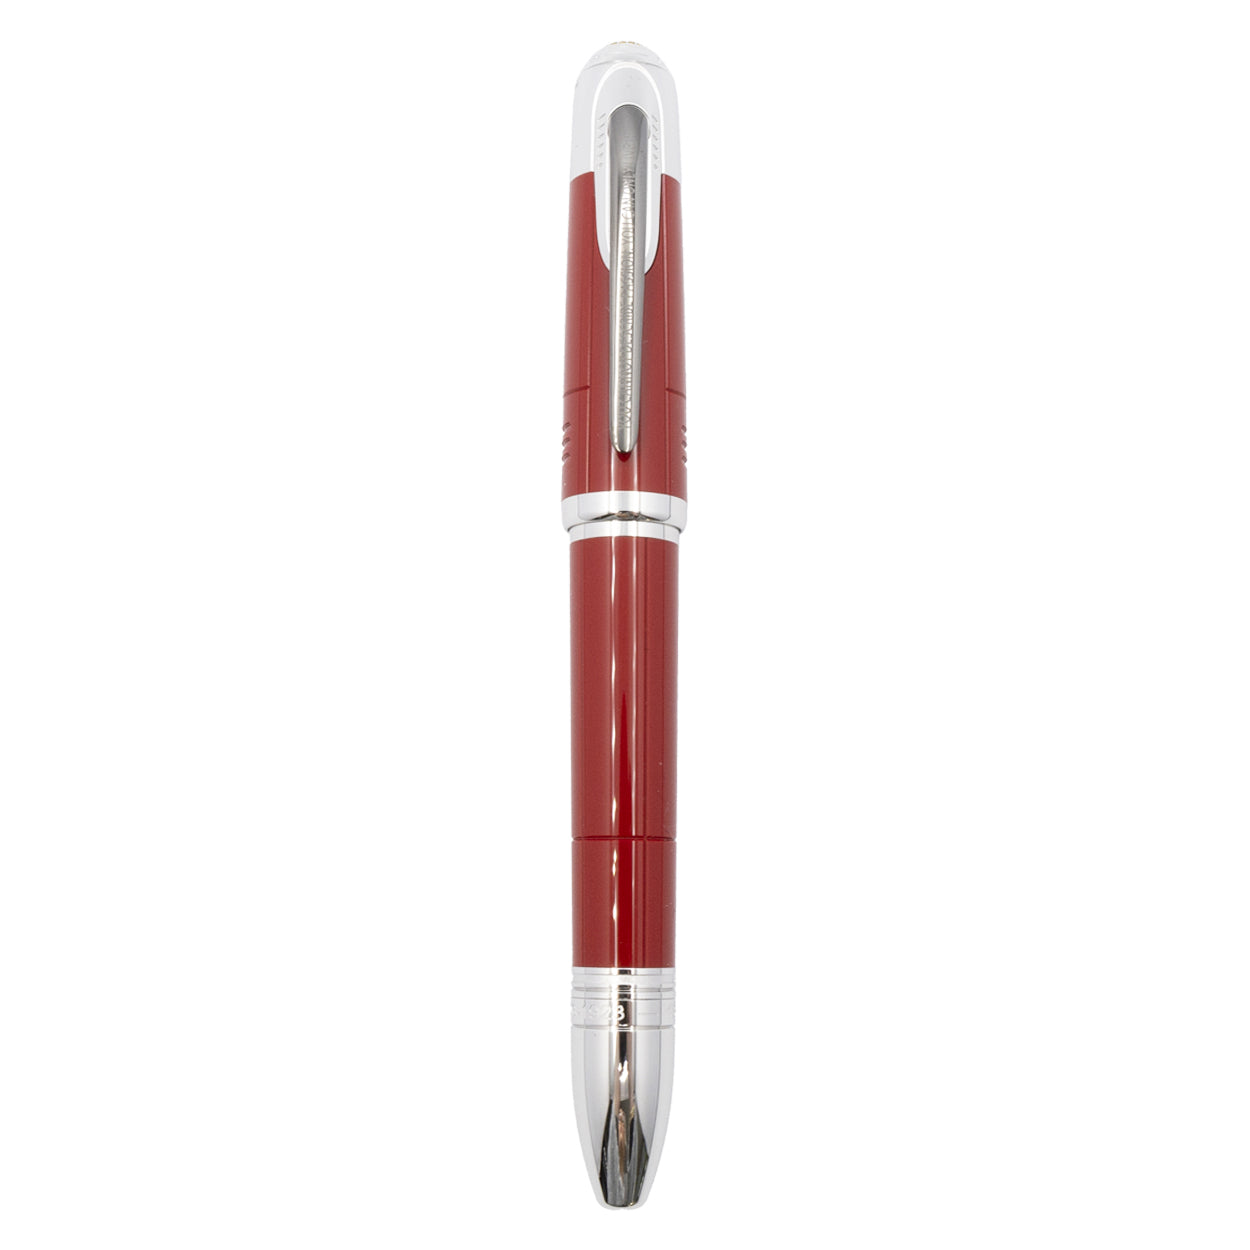 Montblanc Great Characters Enzo Ferrari Special Edition Red Rollerball Pen (Blemished Box)